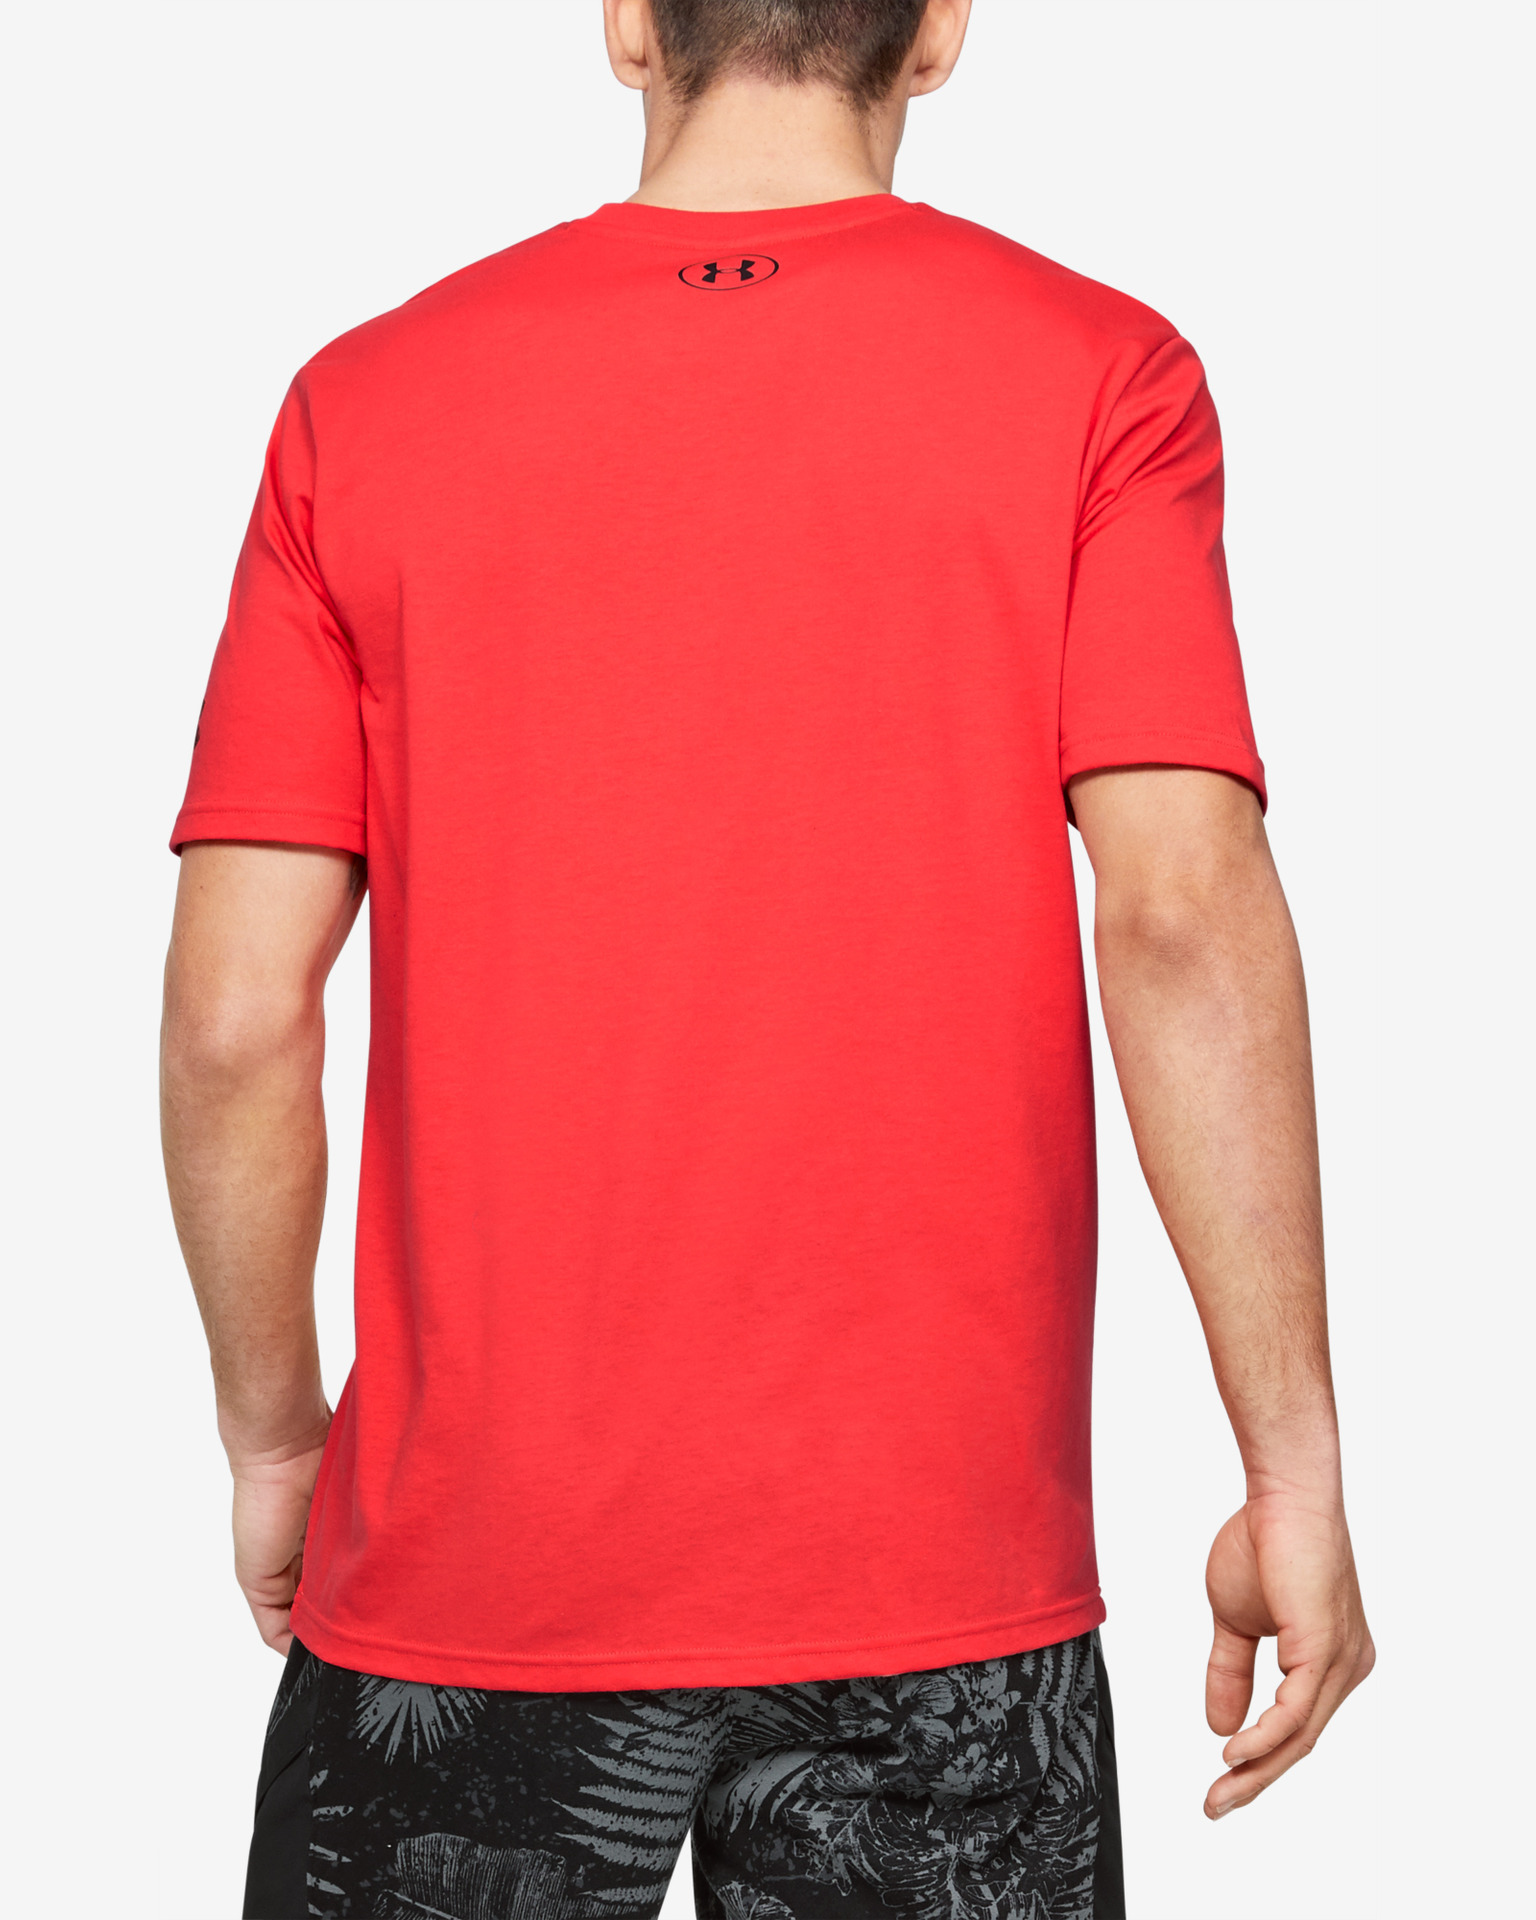  Under Armour Men's Project Rock Brahma Bull Shirt Black/Red :  Clothing, Shoes & Jewelry